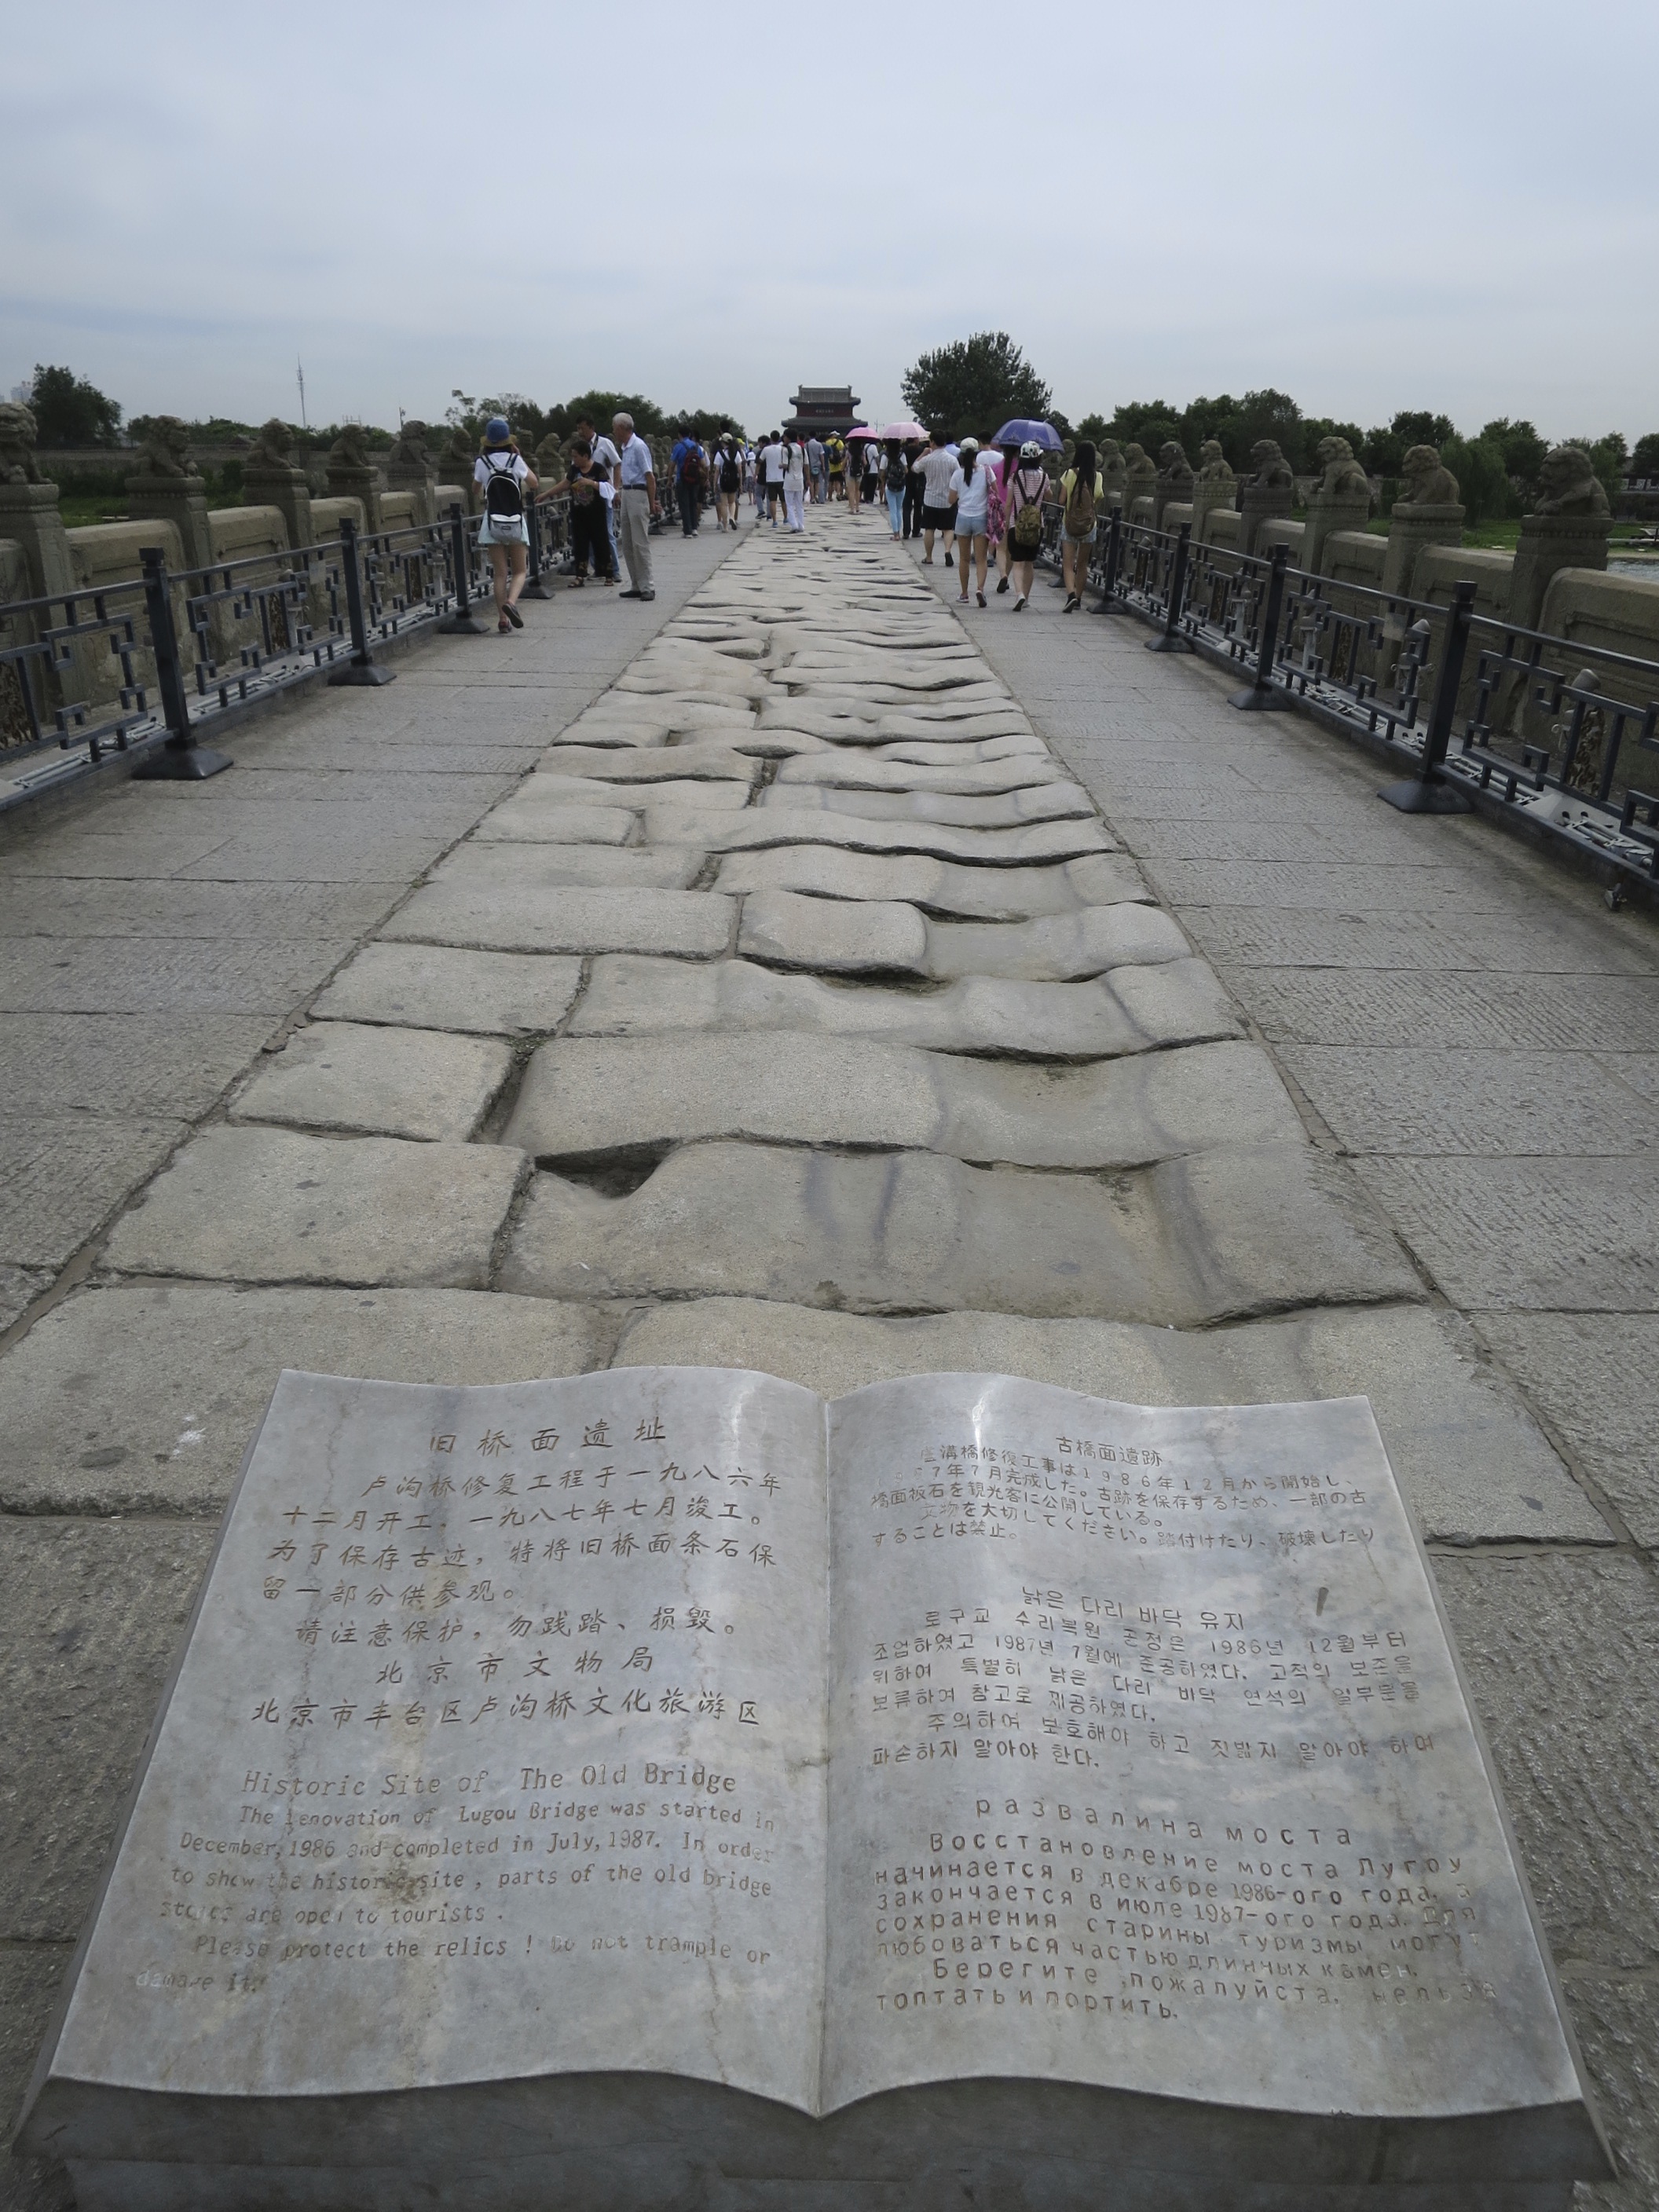 Marco Polo Bridge roadway with multi-lingual commemorative marker, looking toward Wanping in the distance. Source: Author’s Collection, 2014.